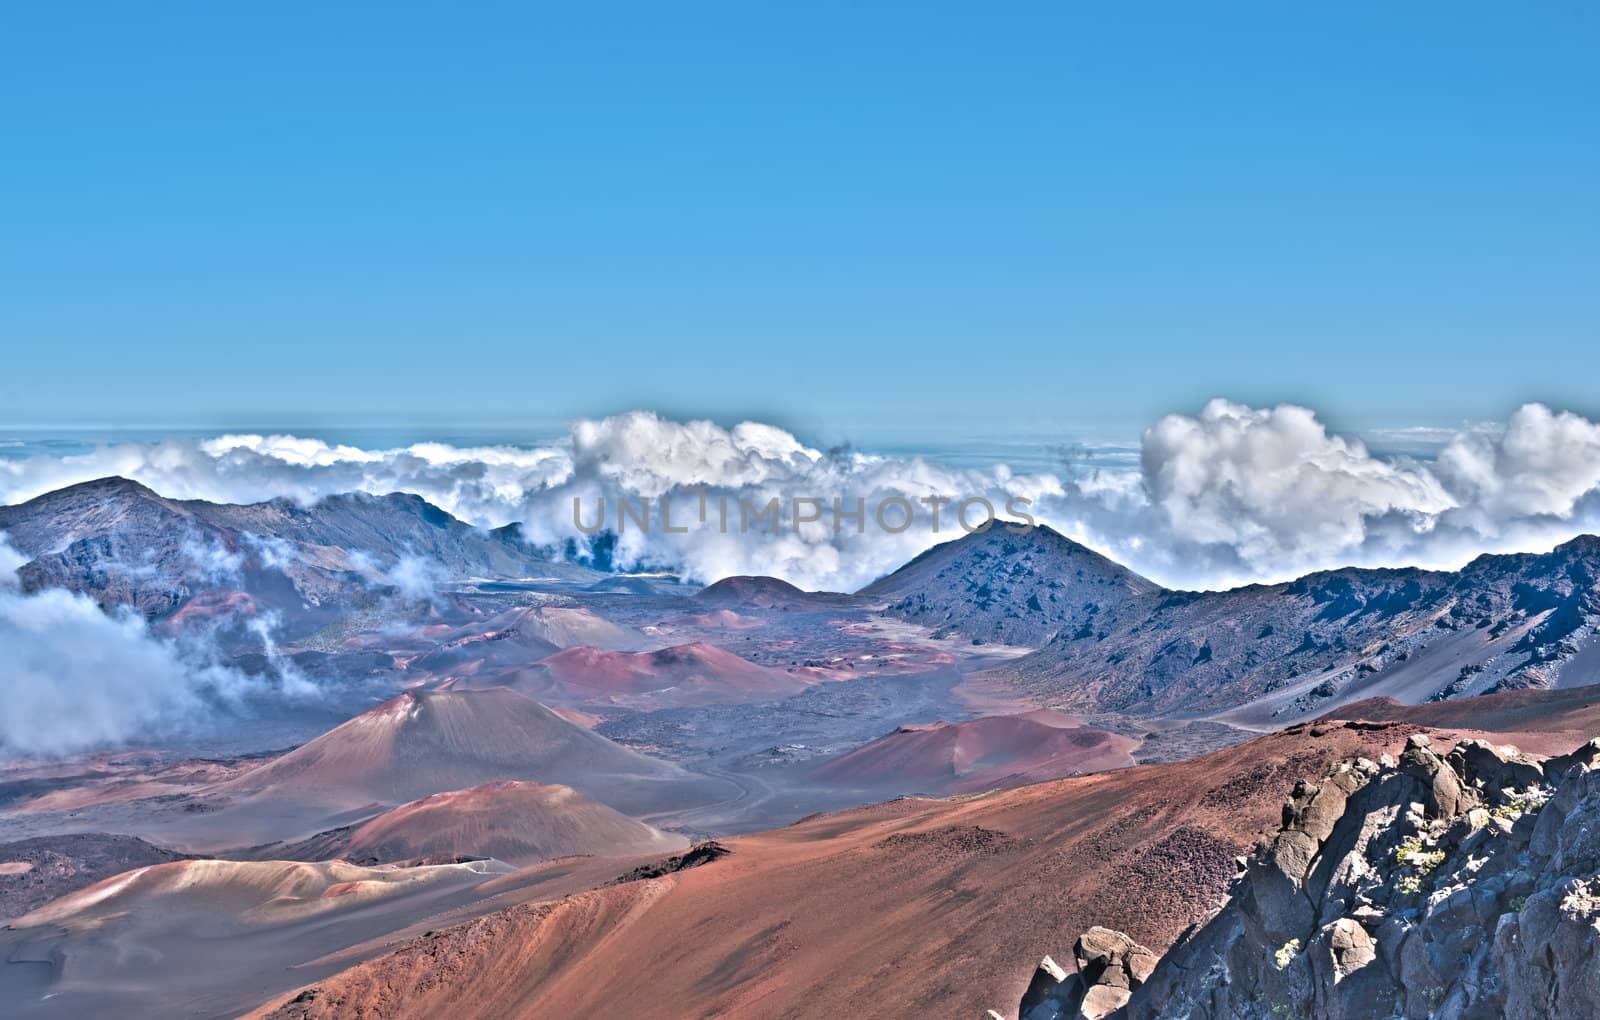 Haleakala Volcano and Crater Maui Hawaii showing surrealistic surface with mountains, lava tubes, rocks.
HDR image total five images put together and processed